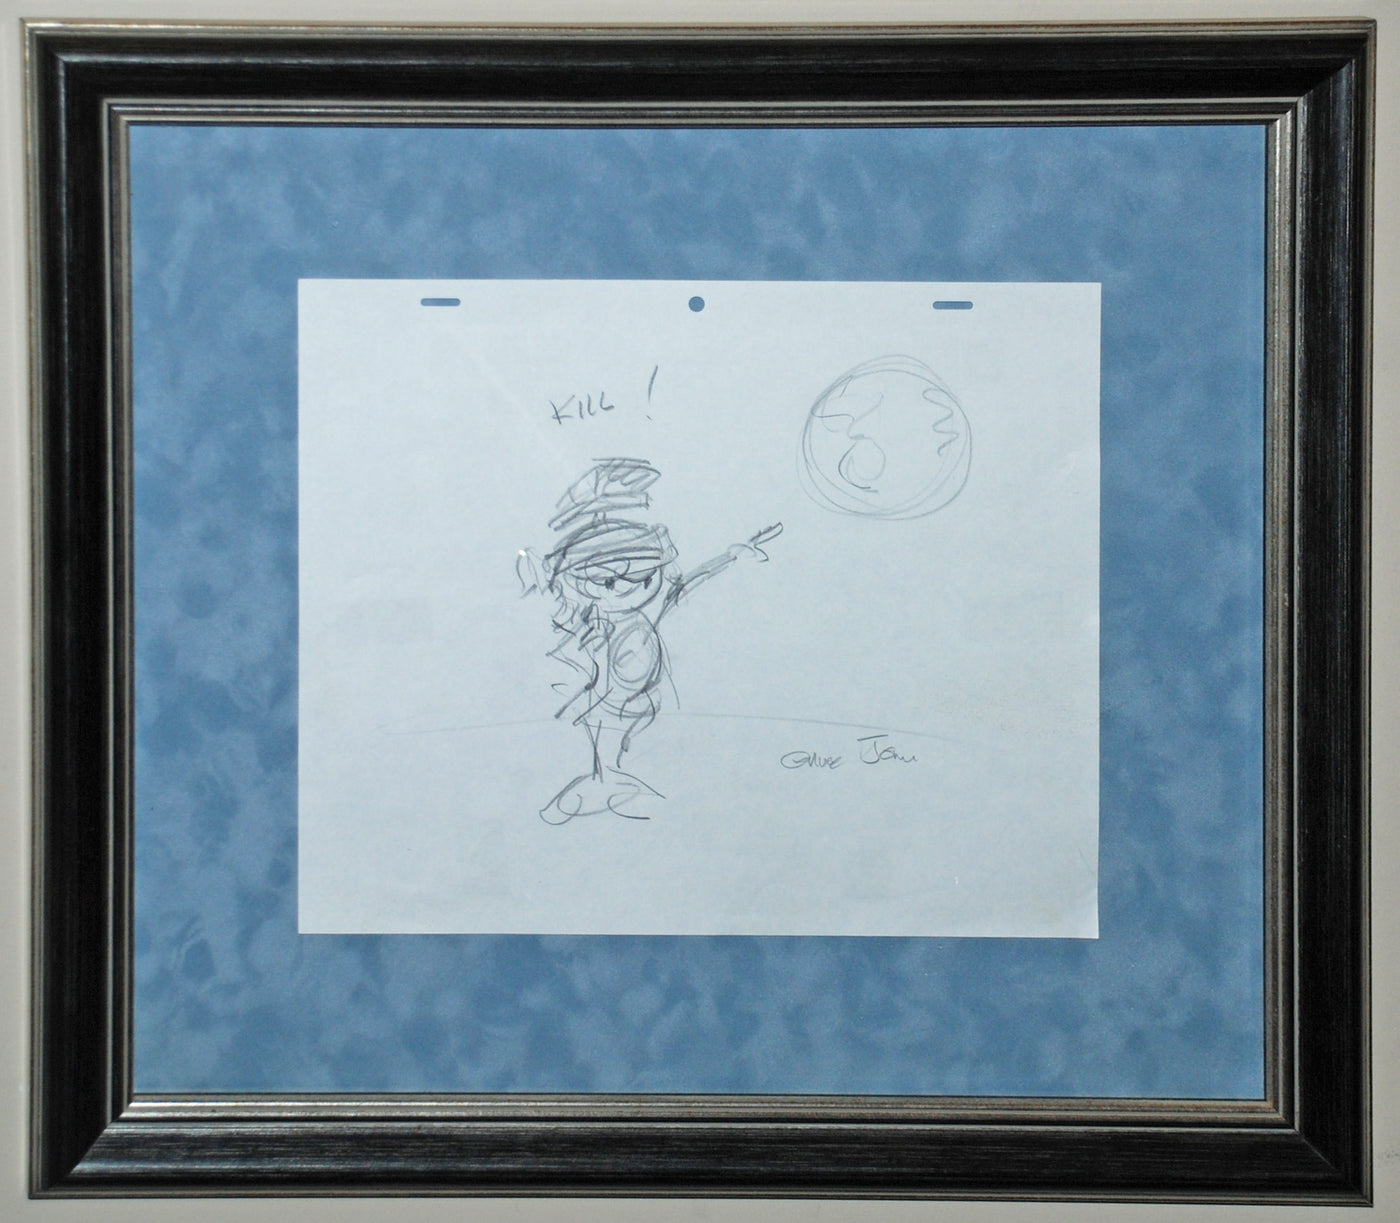 Original Warner Brothers Concept Drawing featuing Marvin the Martian